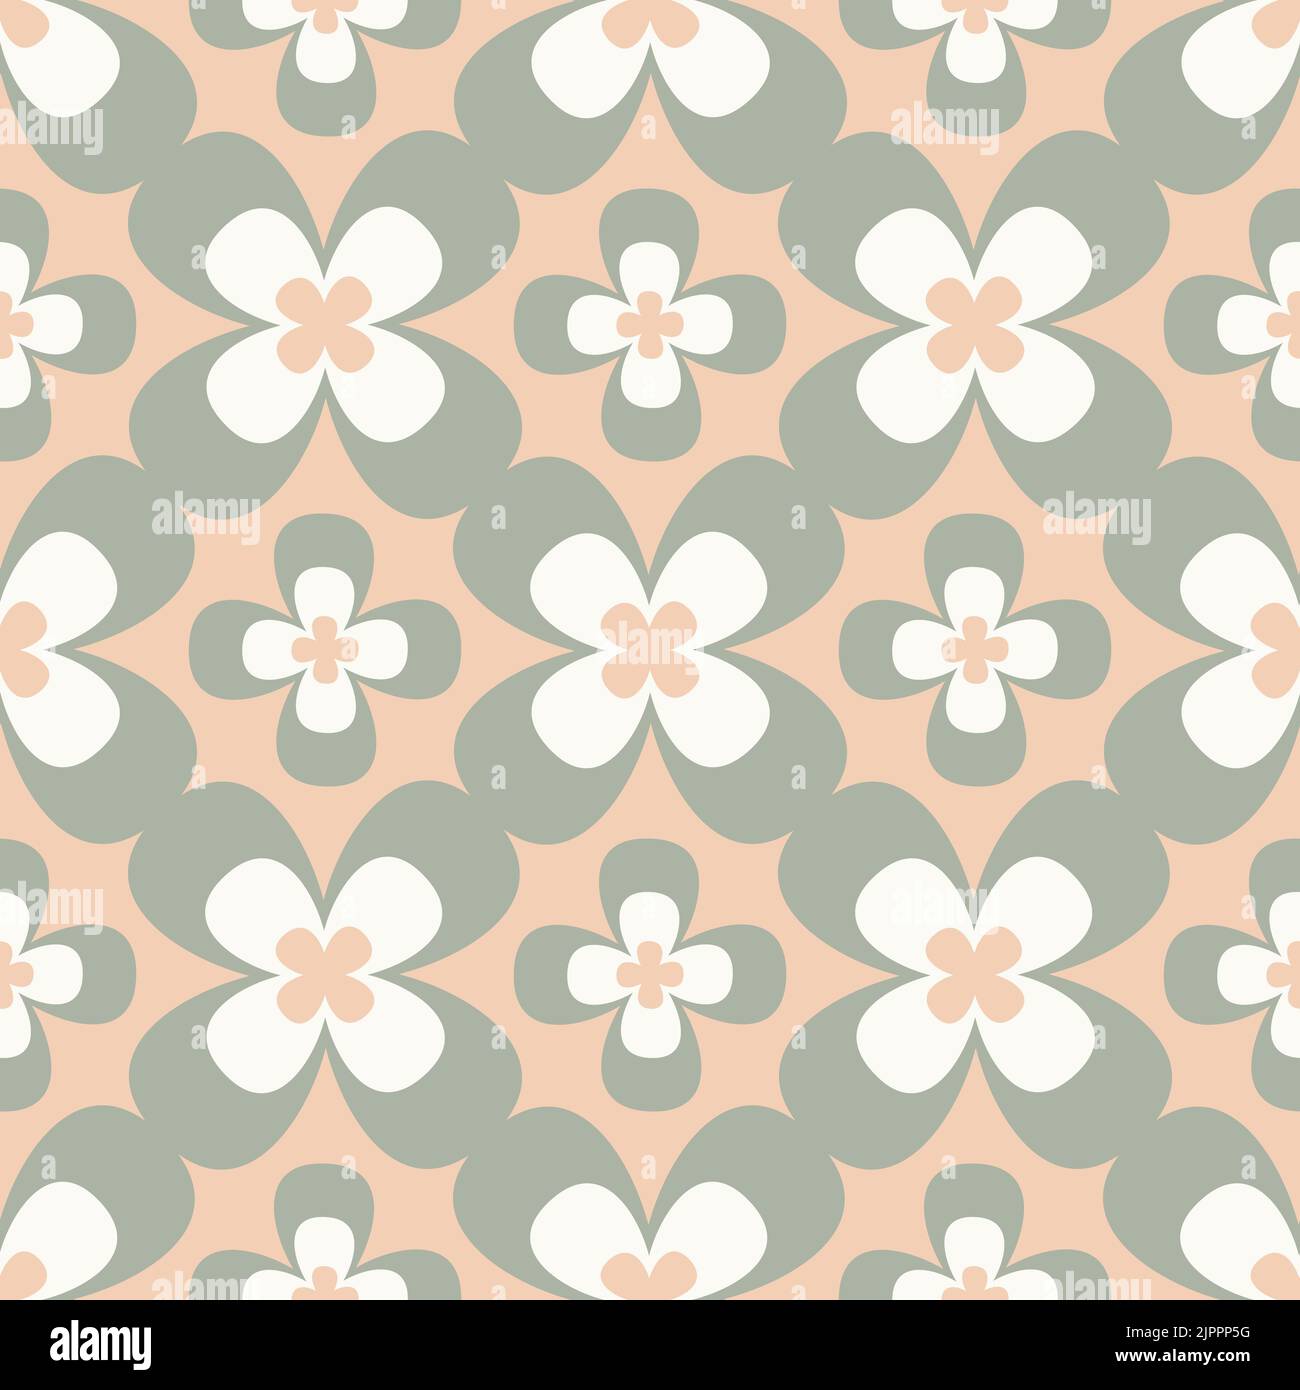 Retro vector seamless pattern from the 60s, 70s. Stock Vector